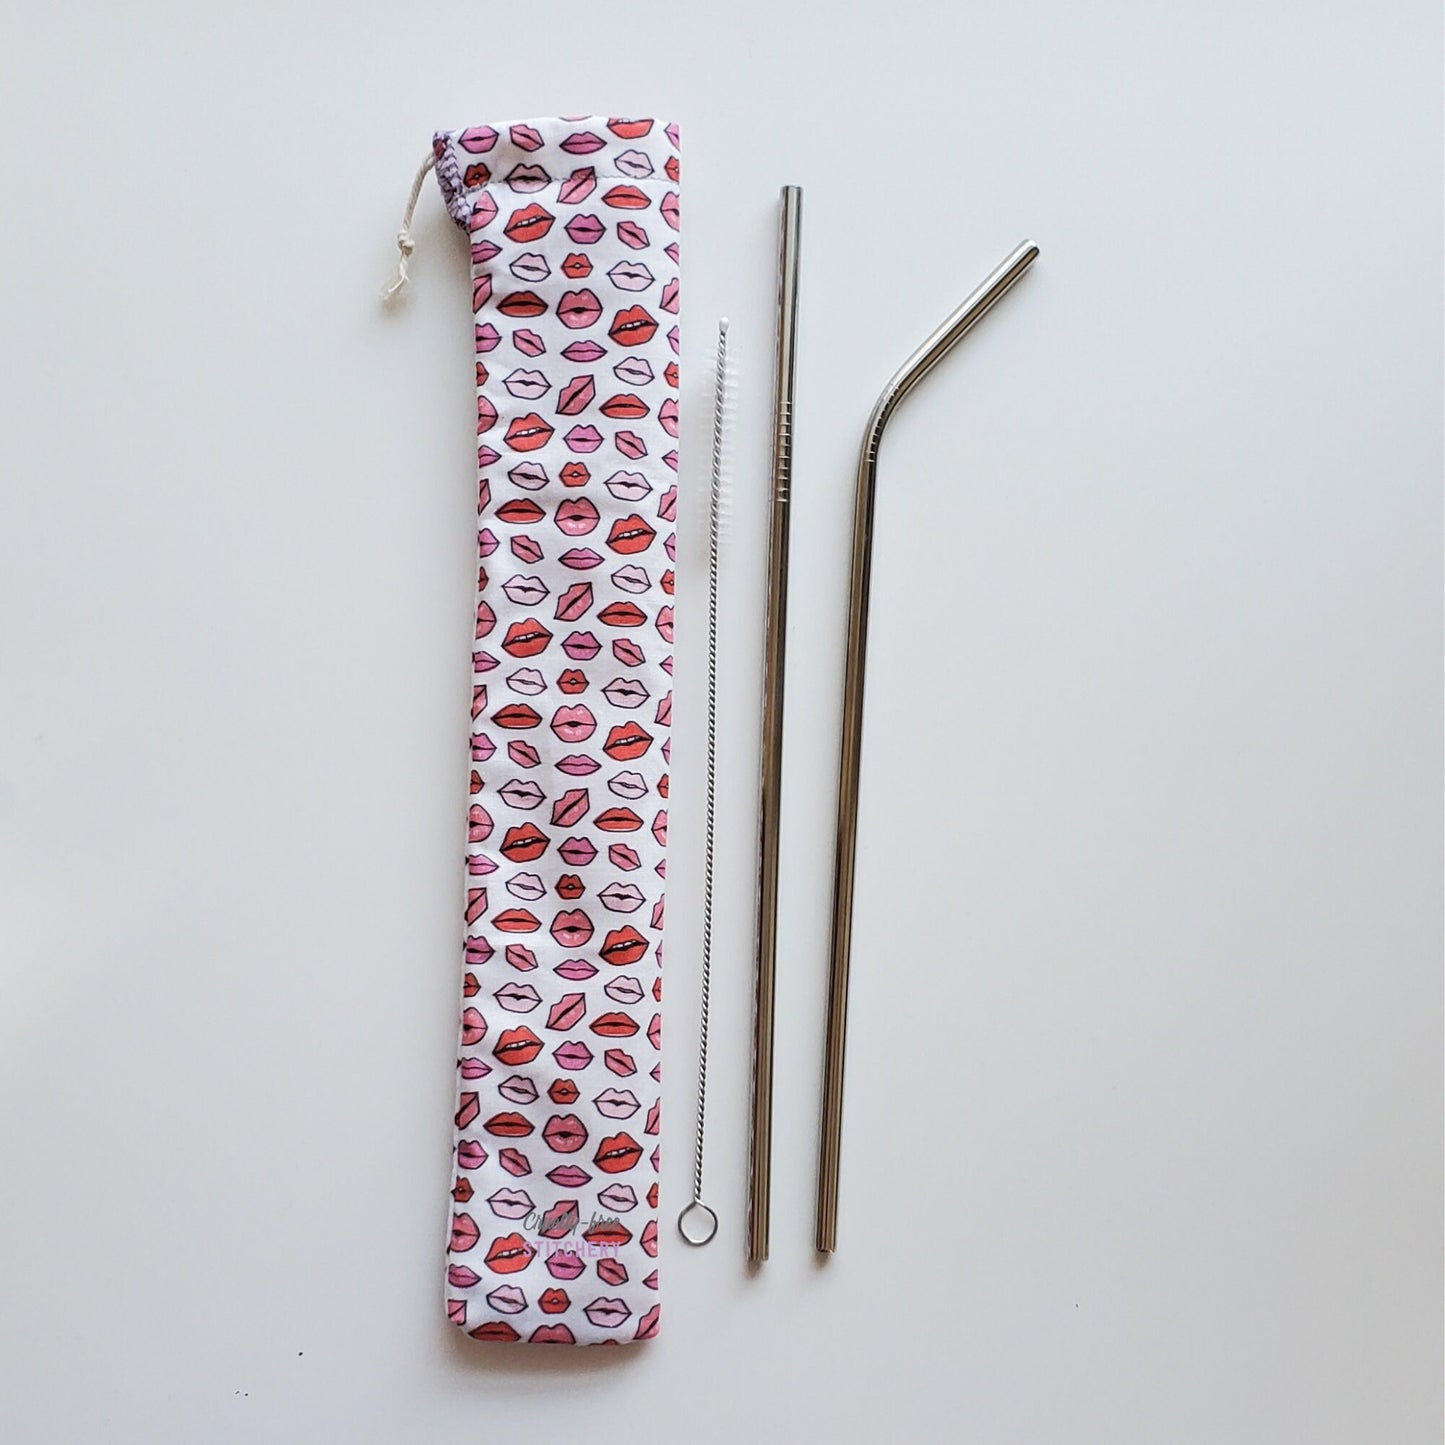 Reusable straw pouch in the same lips print laying vertically next to a straw cleaner brush, a straight stainless steel straw, and a bent stainless steel straw.